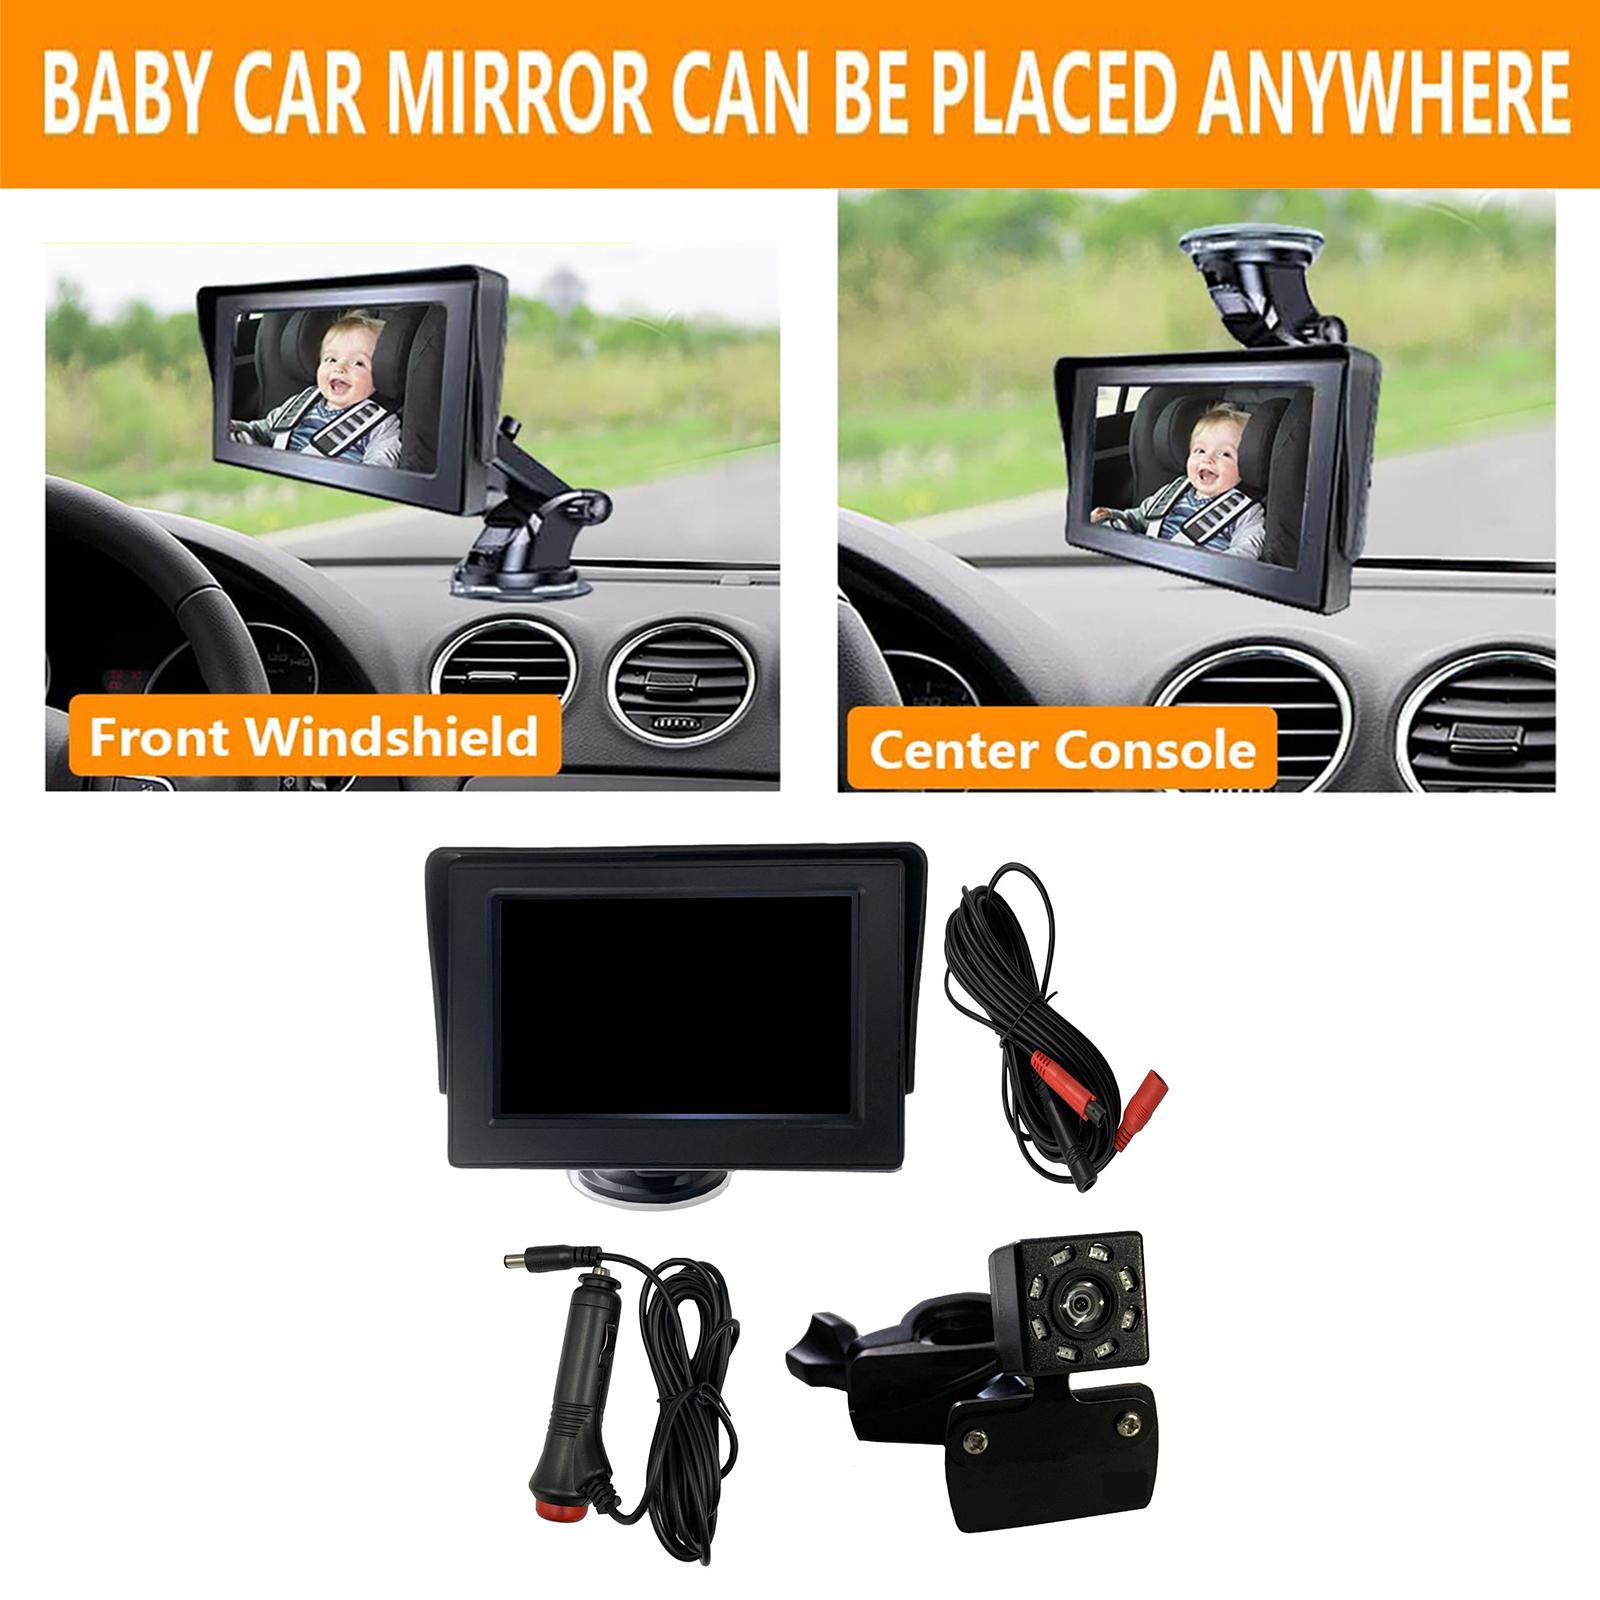 Baby Car Mirror Display Screen Easily Observe Baby Move 4.3 inch Non Folding